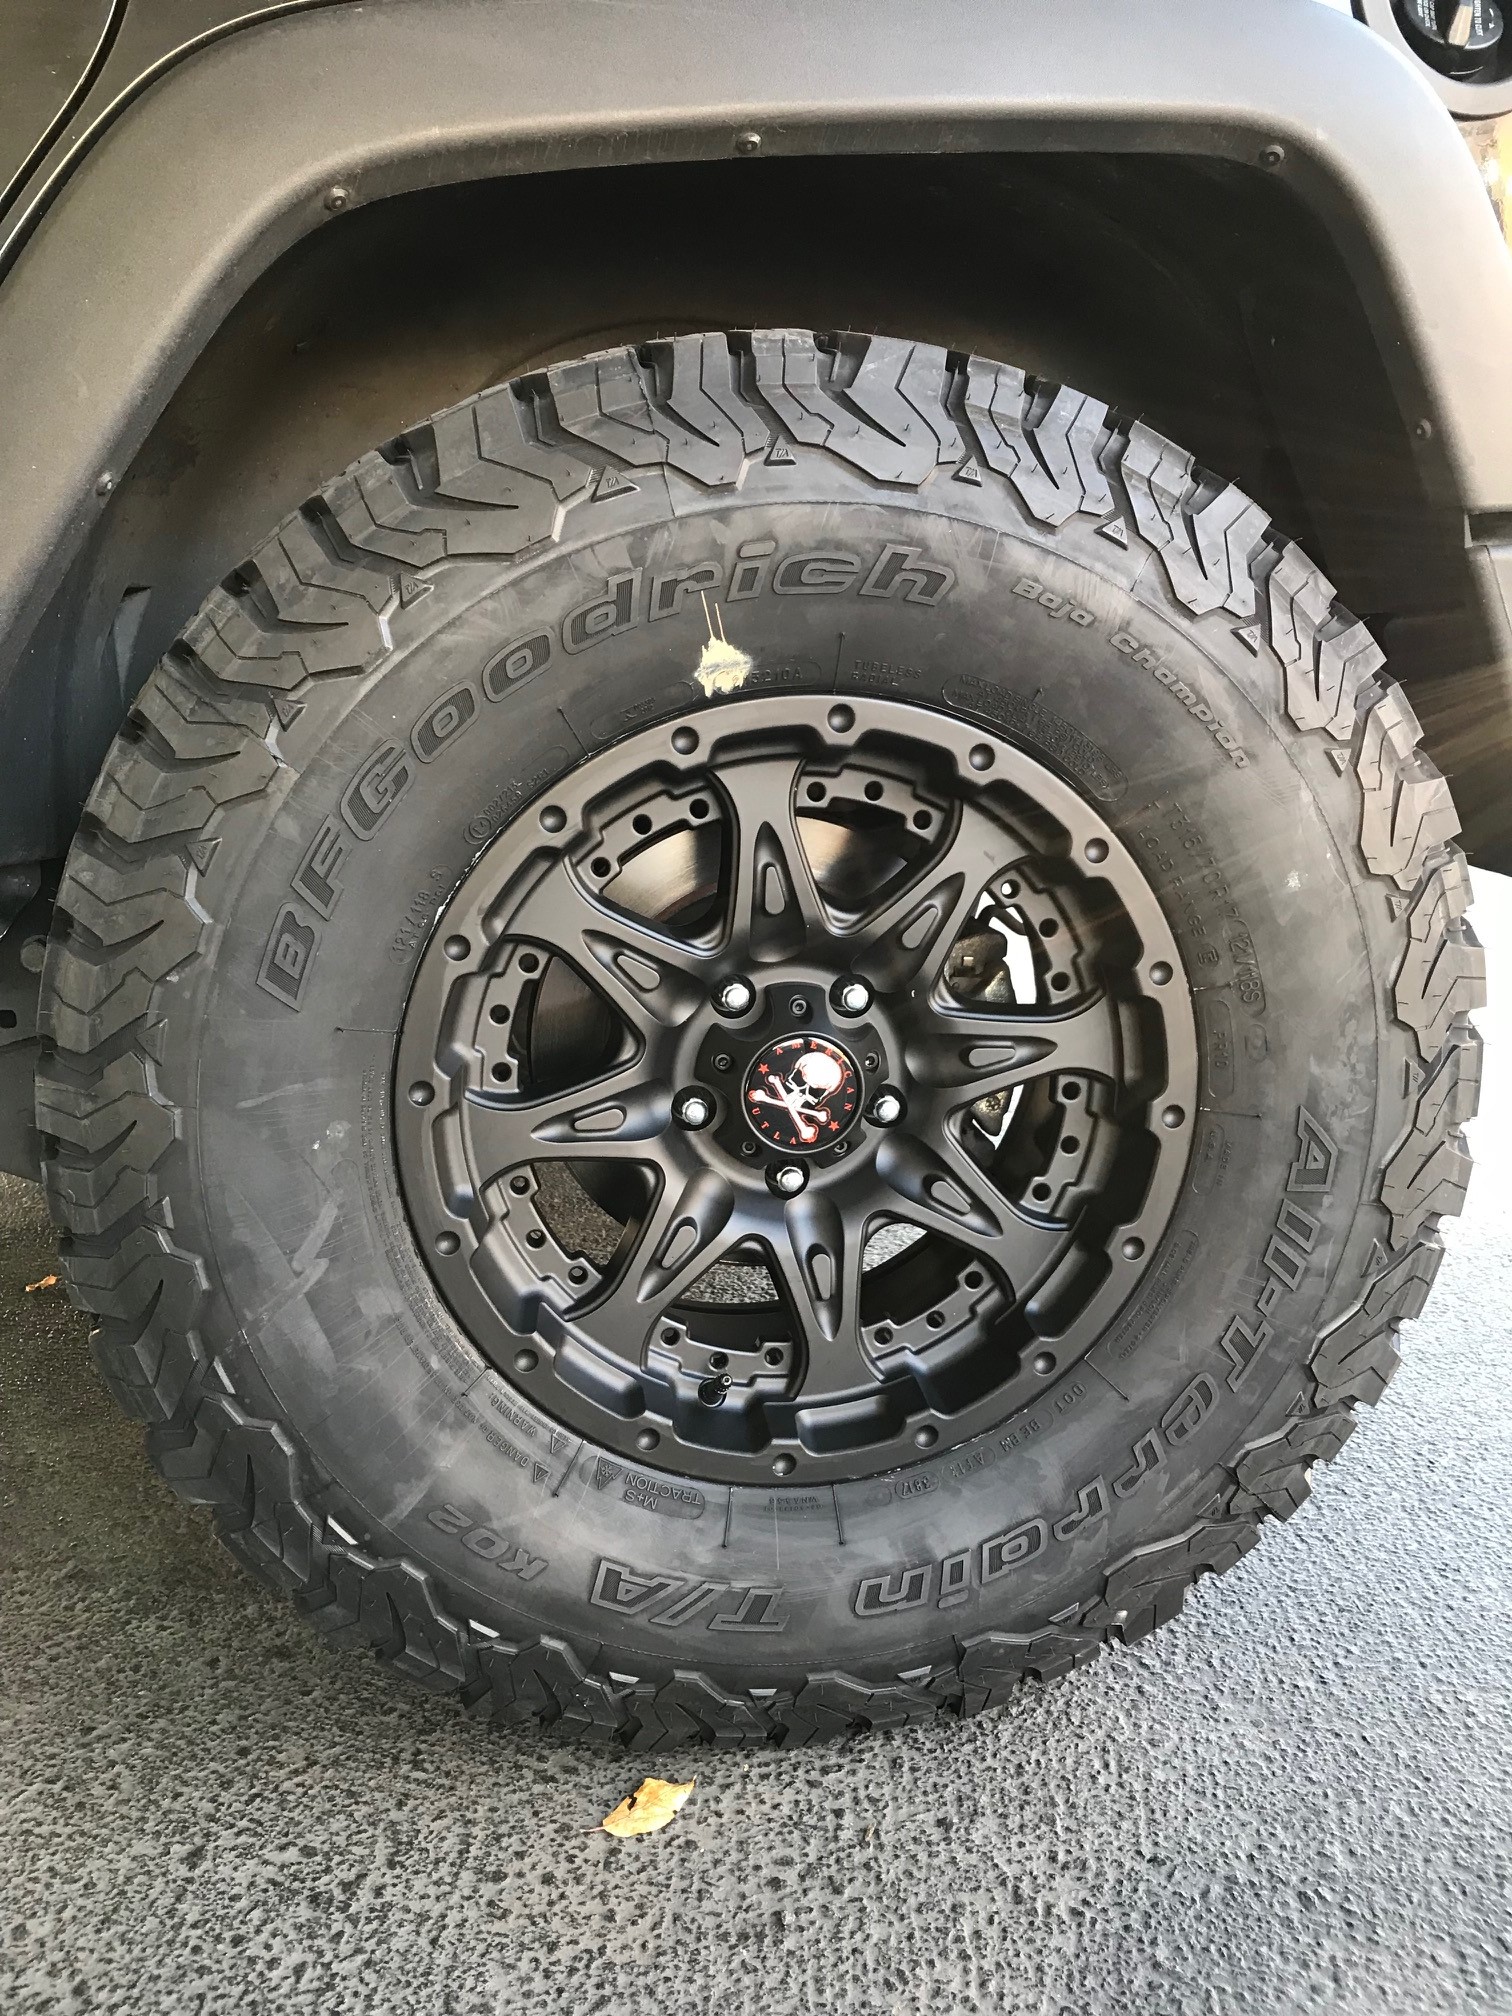 New American Outlaw Buckshot rims  - The top destination for Jeep  JK and JL Wrangler news, rumors, and discussion